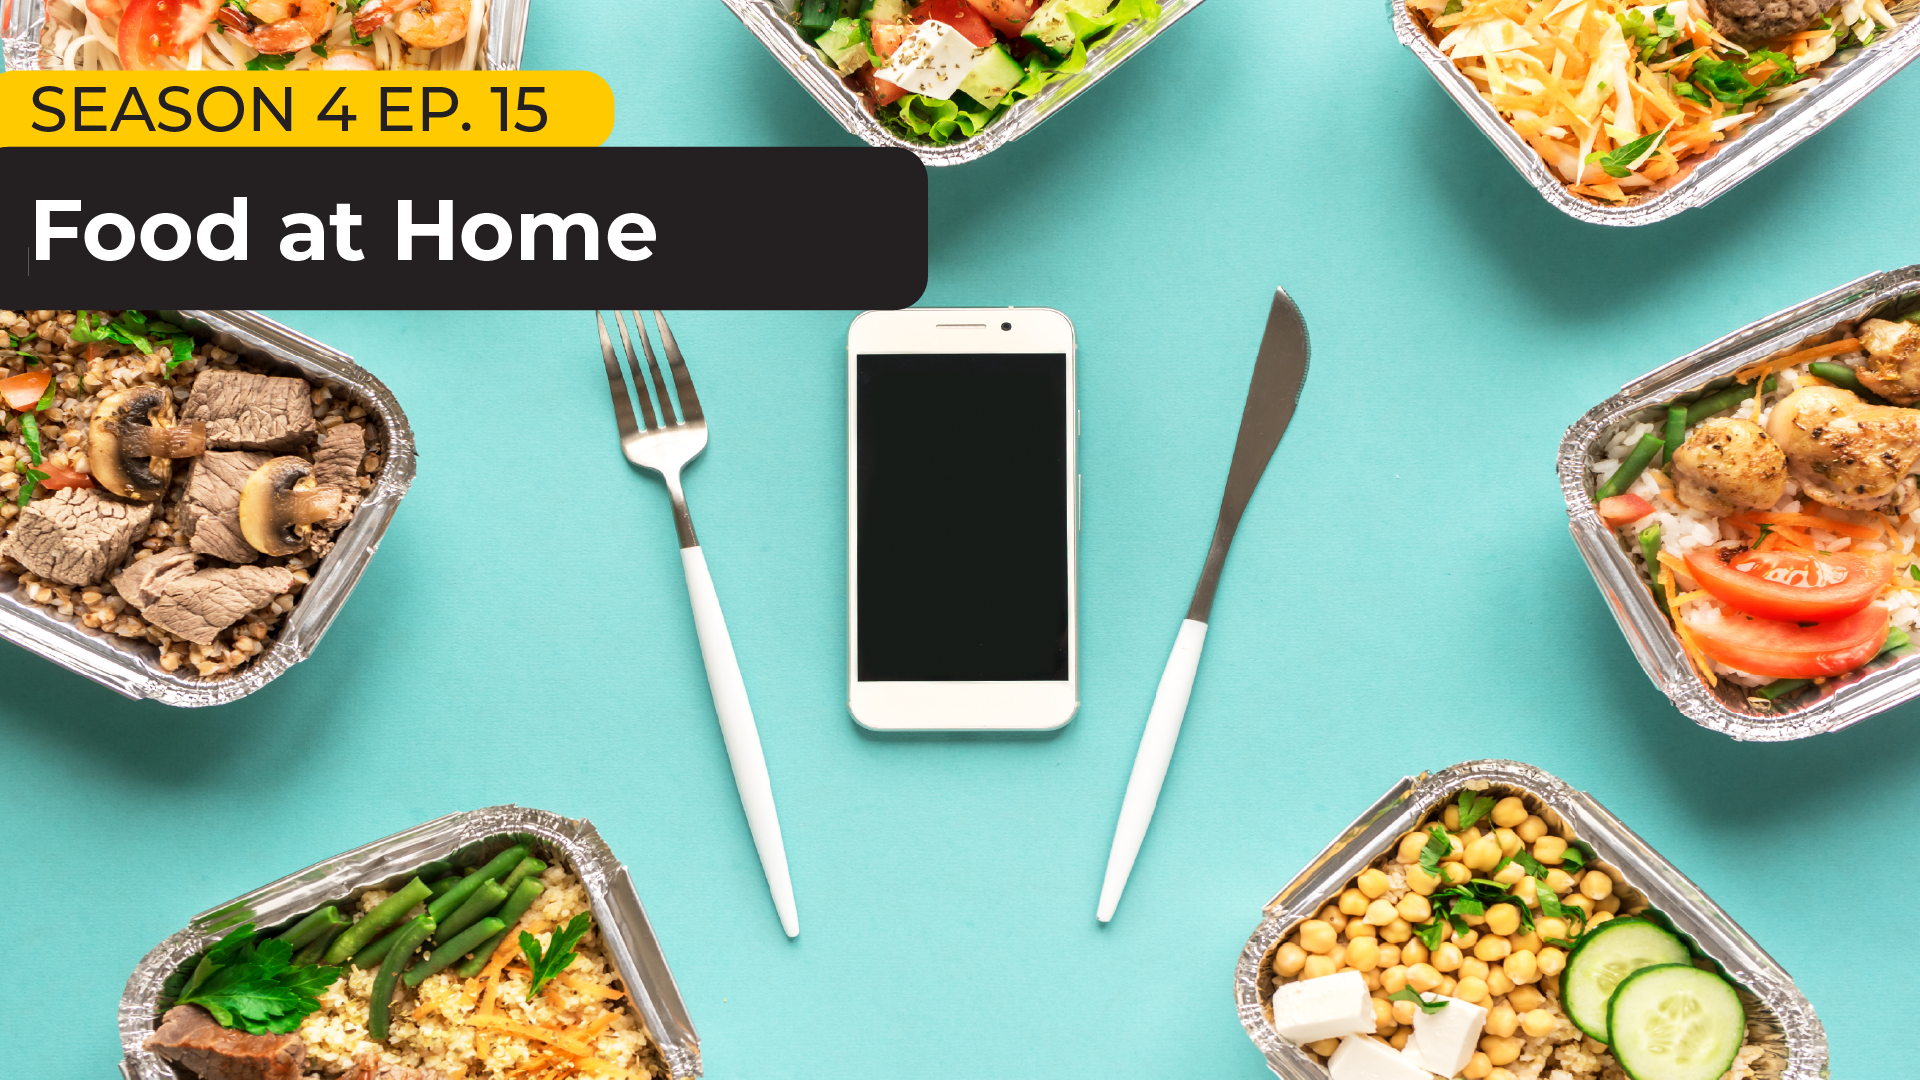 Datassential's Jack Li and Gerald Oksanen will share key insights from our NEW Food @ Home Keynote Report.